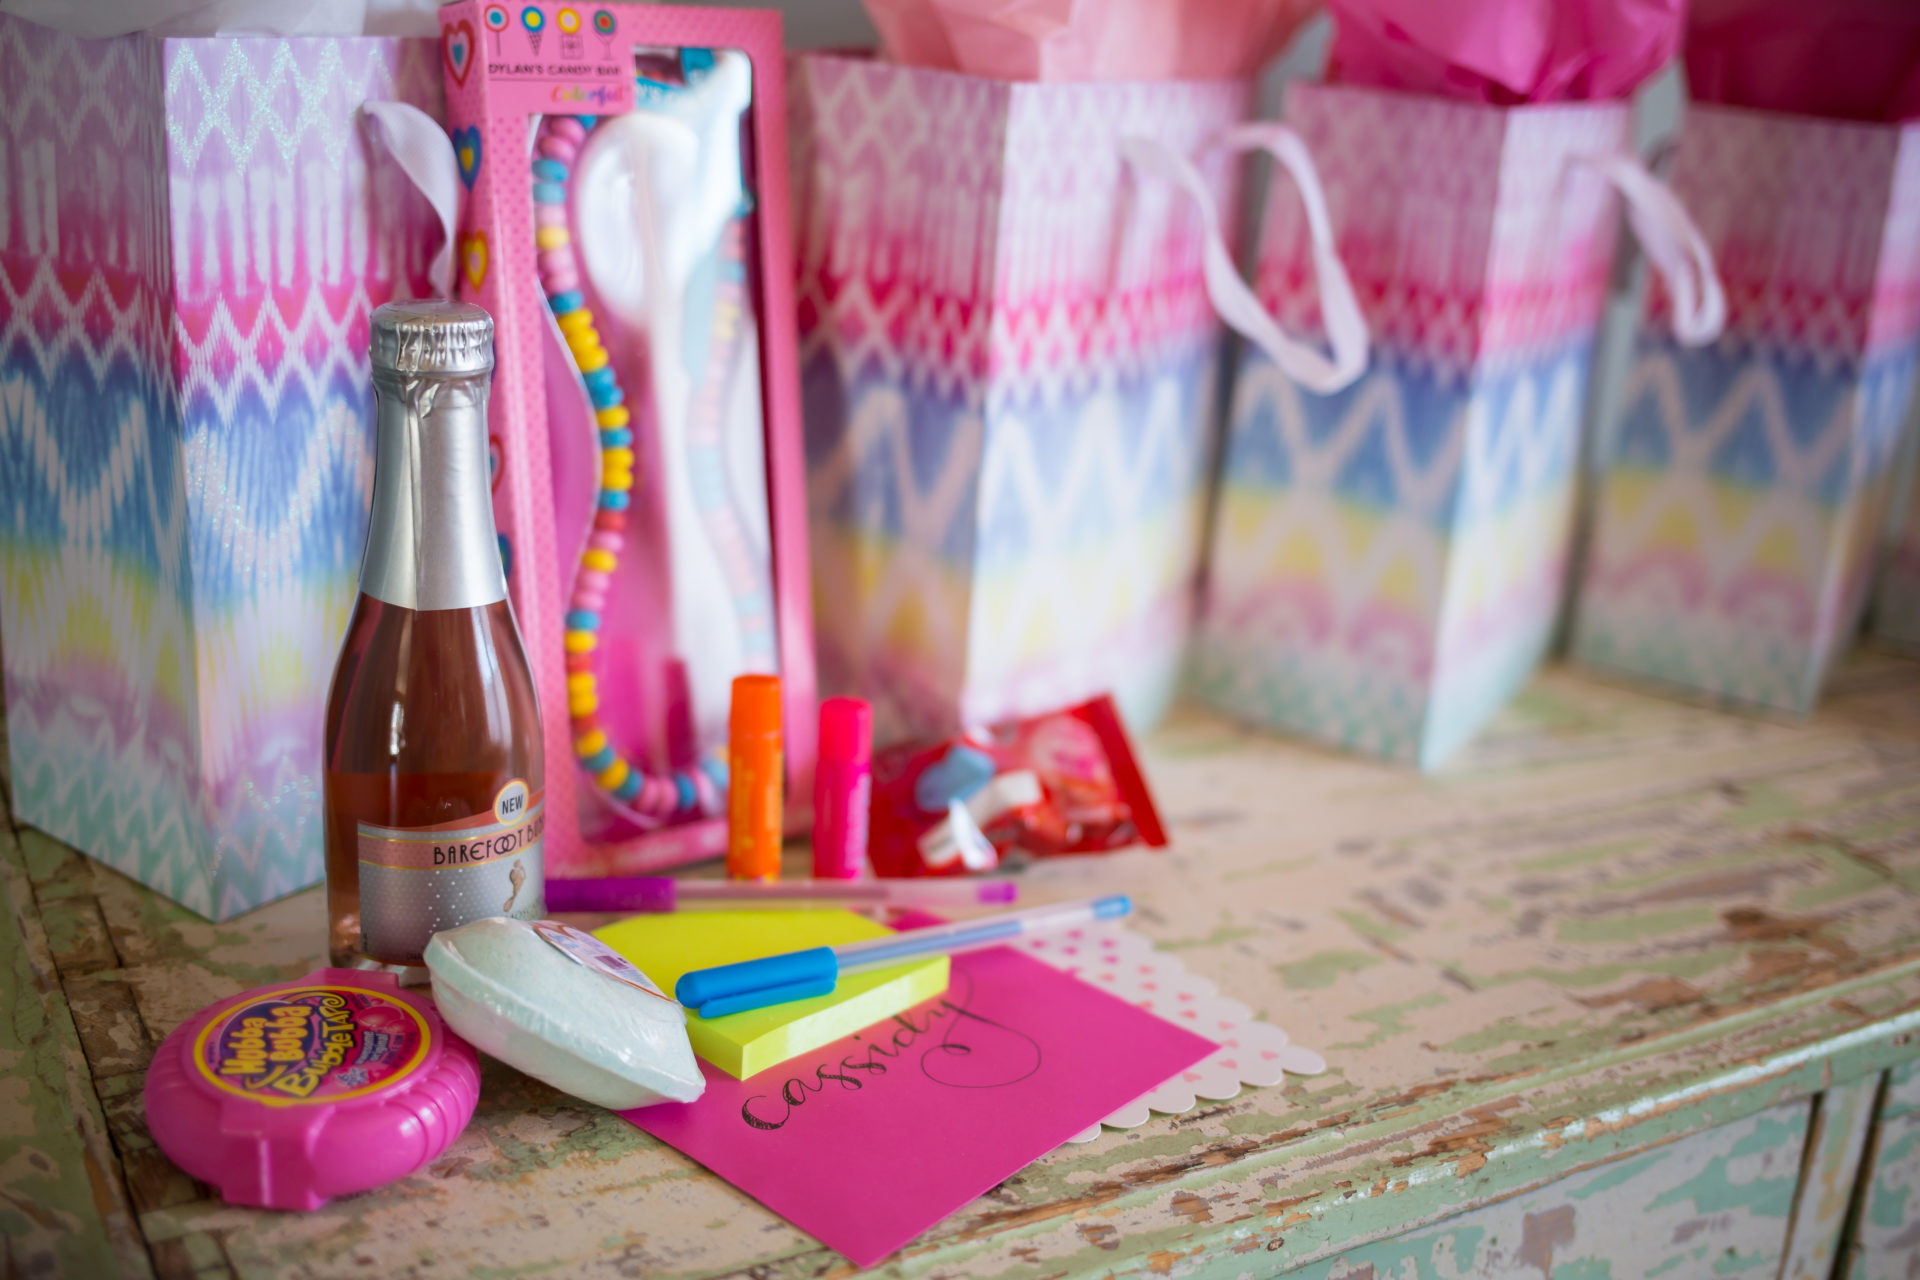 How To Host a 90's Themed Galentines Party! - Living in Yellow5207 x 3471